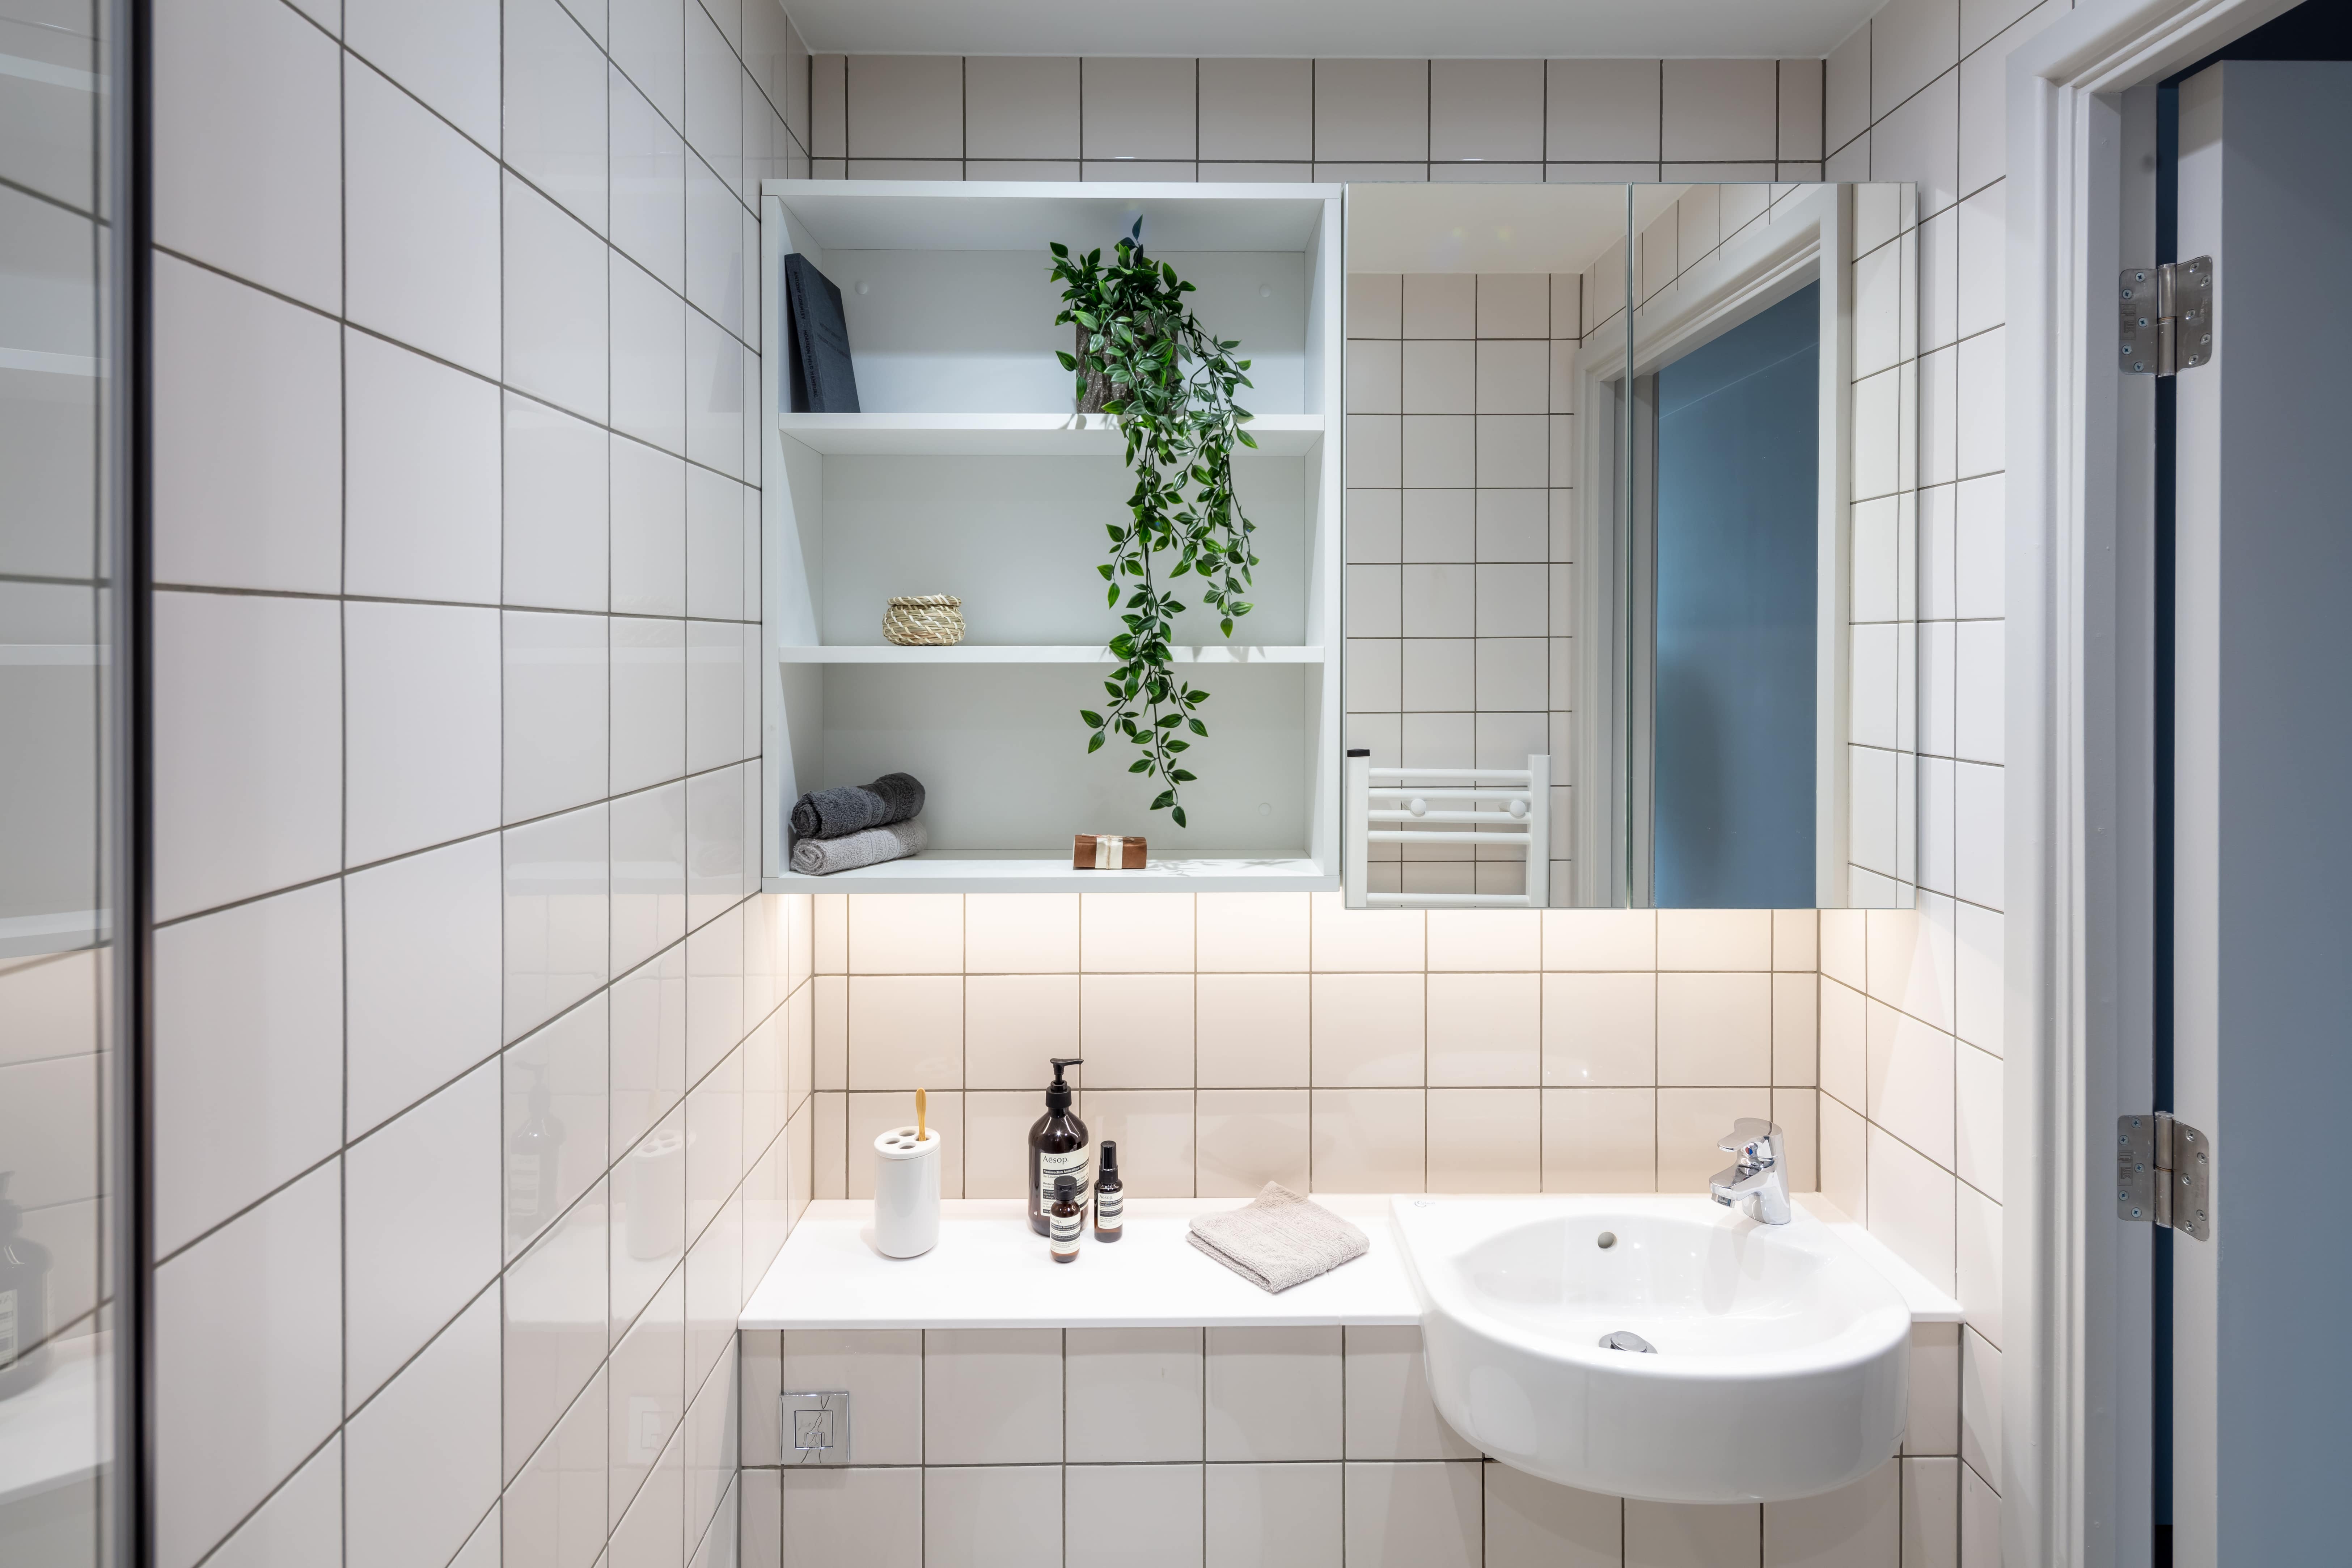 Keep up with skincare rituals in your private bathroom